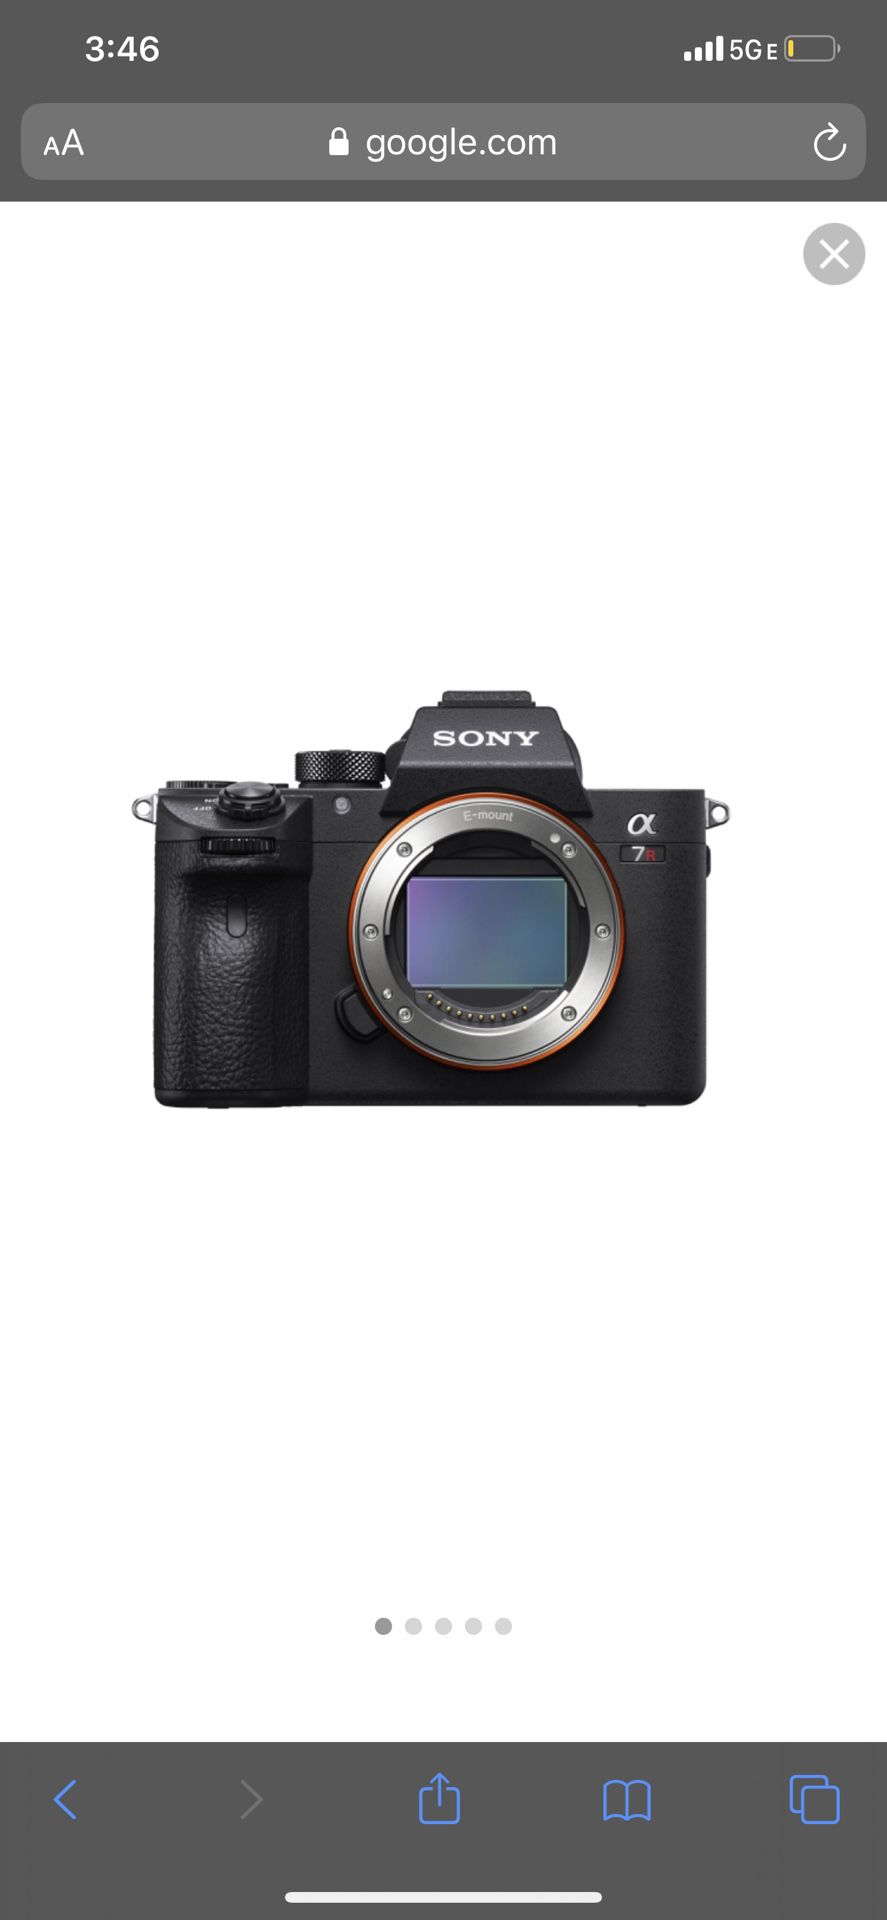 Sony a7riii with kit lens for sale or trade for Sony a7iii